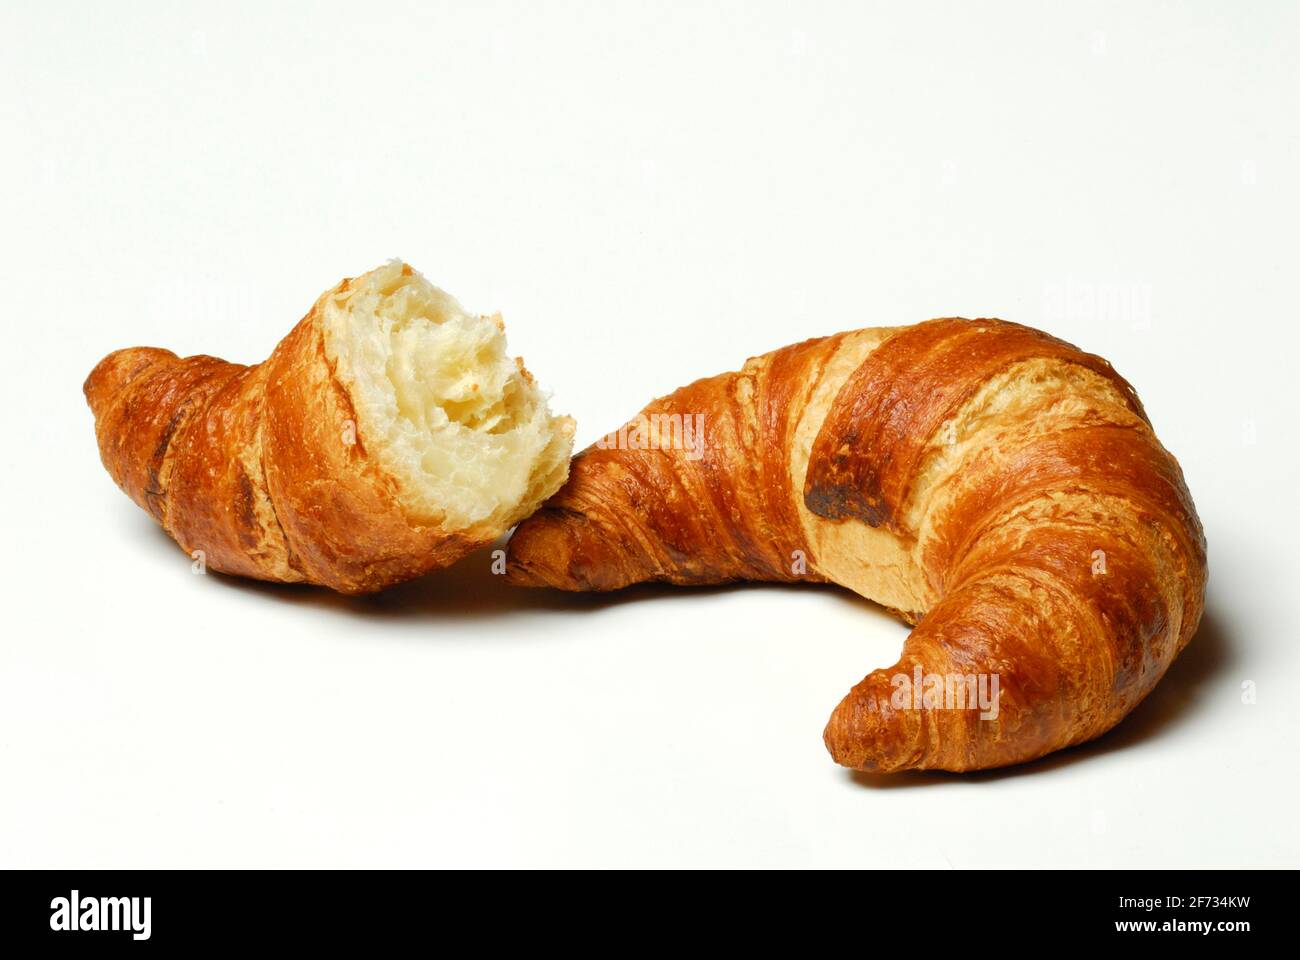 Croissants, whole and half croissant, bakery products, breakfast Stock Photo